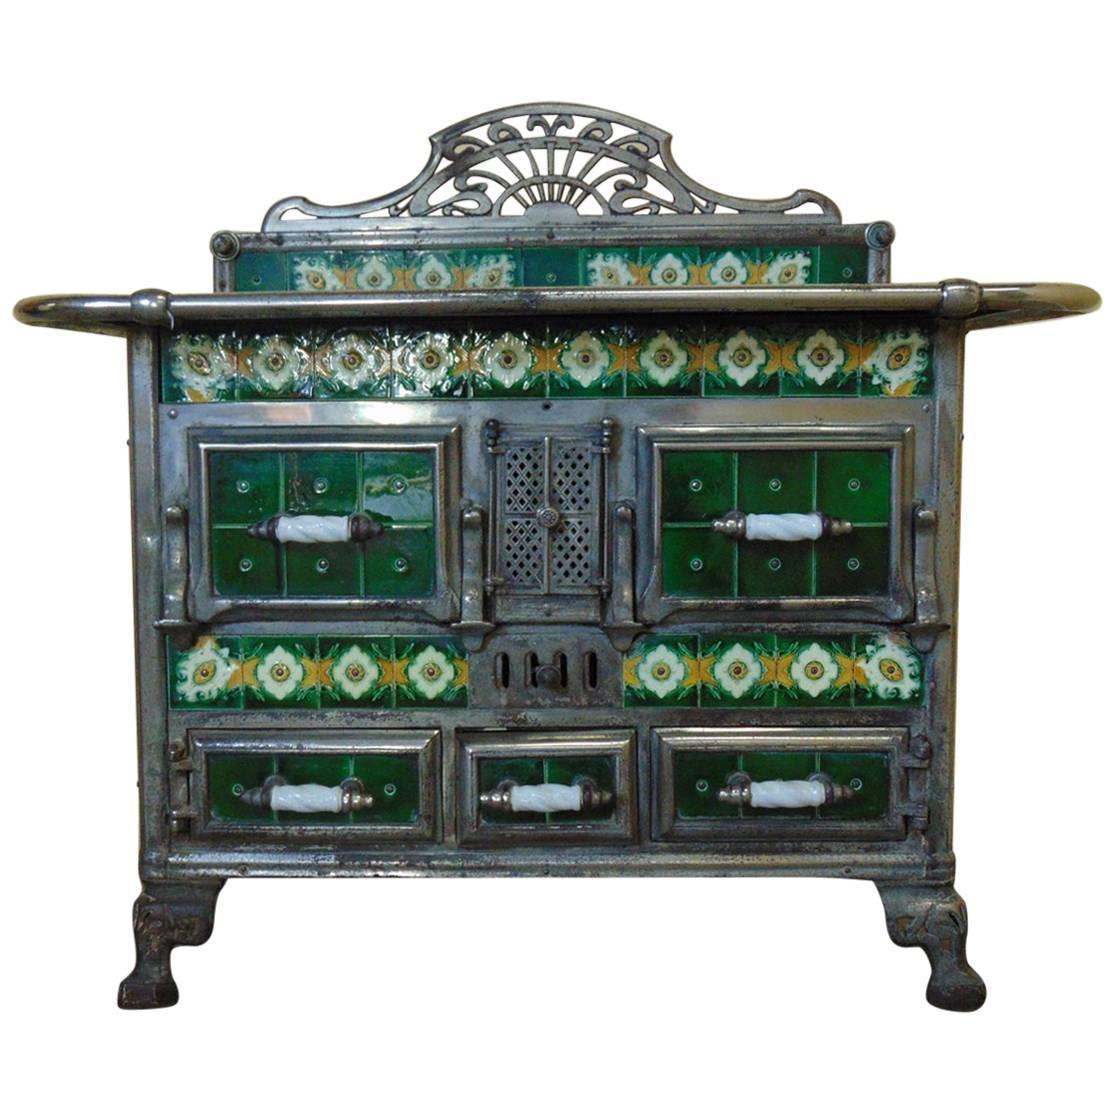 Range Cooker Tiled with Matching Coal Scuttle, circa 1900